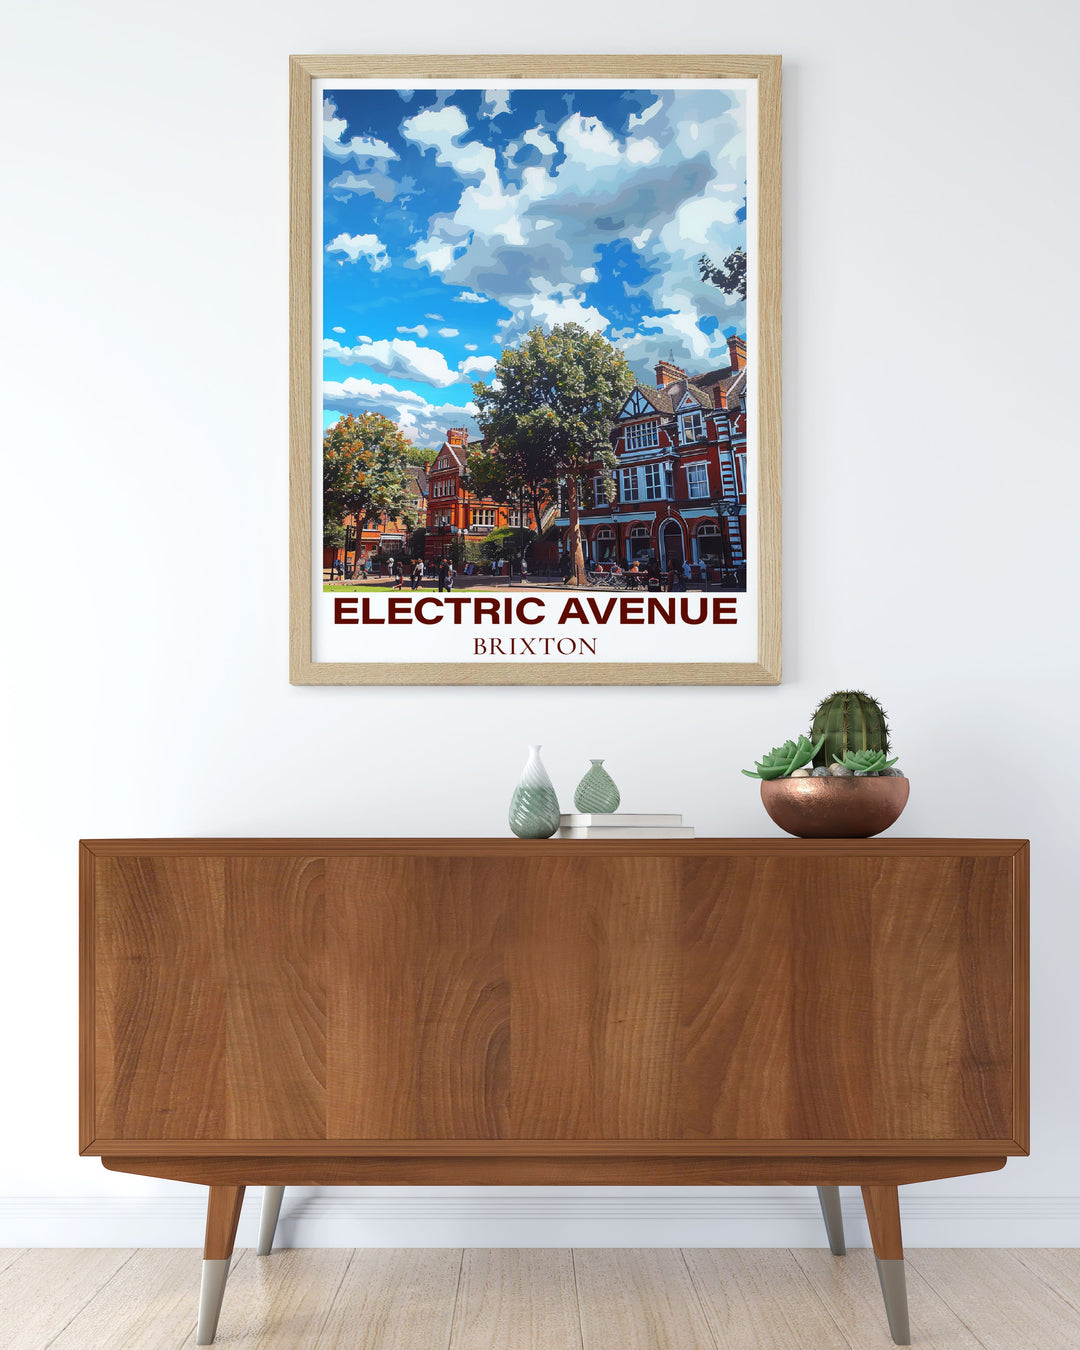 This Brixton travel poster features the bustling Electric Avenue and historic Windrush Square, making it an ideal piece for those who love exploring Londons vibrant and culturally rich neighborhoods.